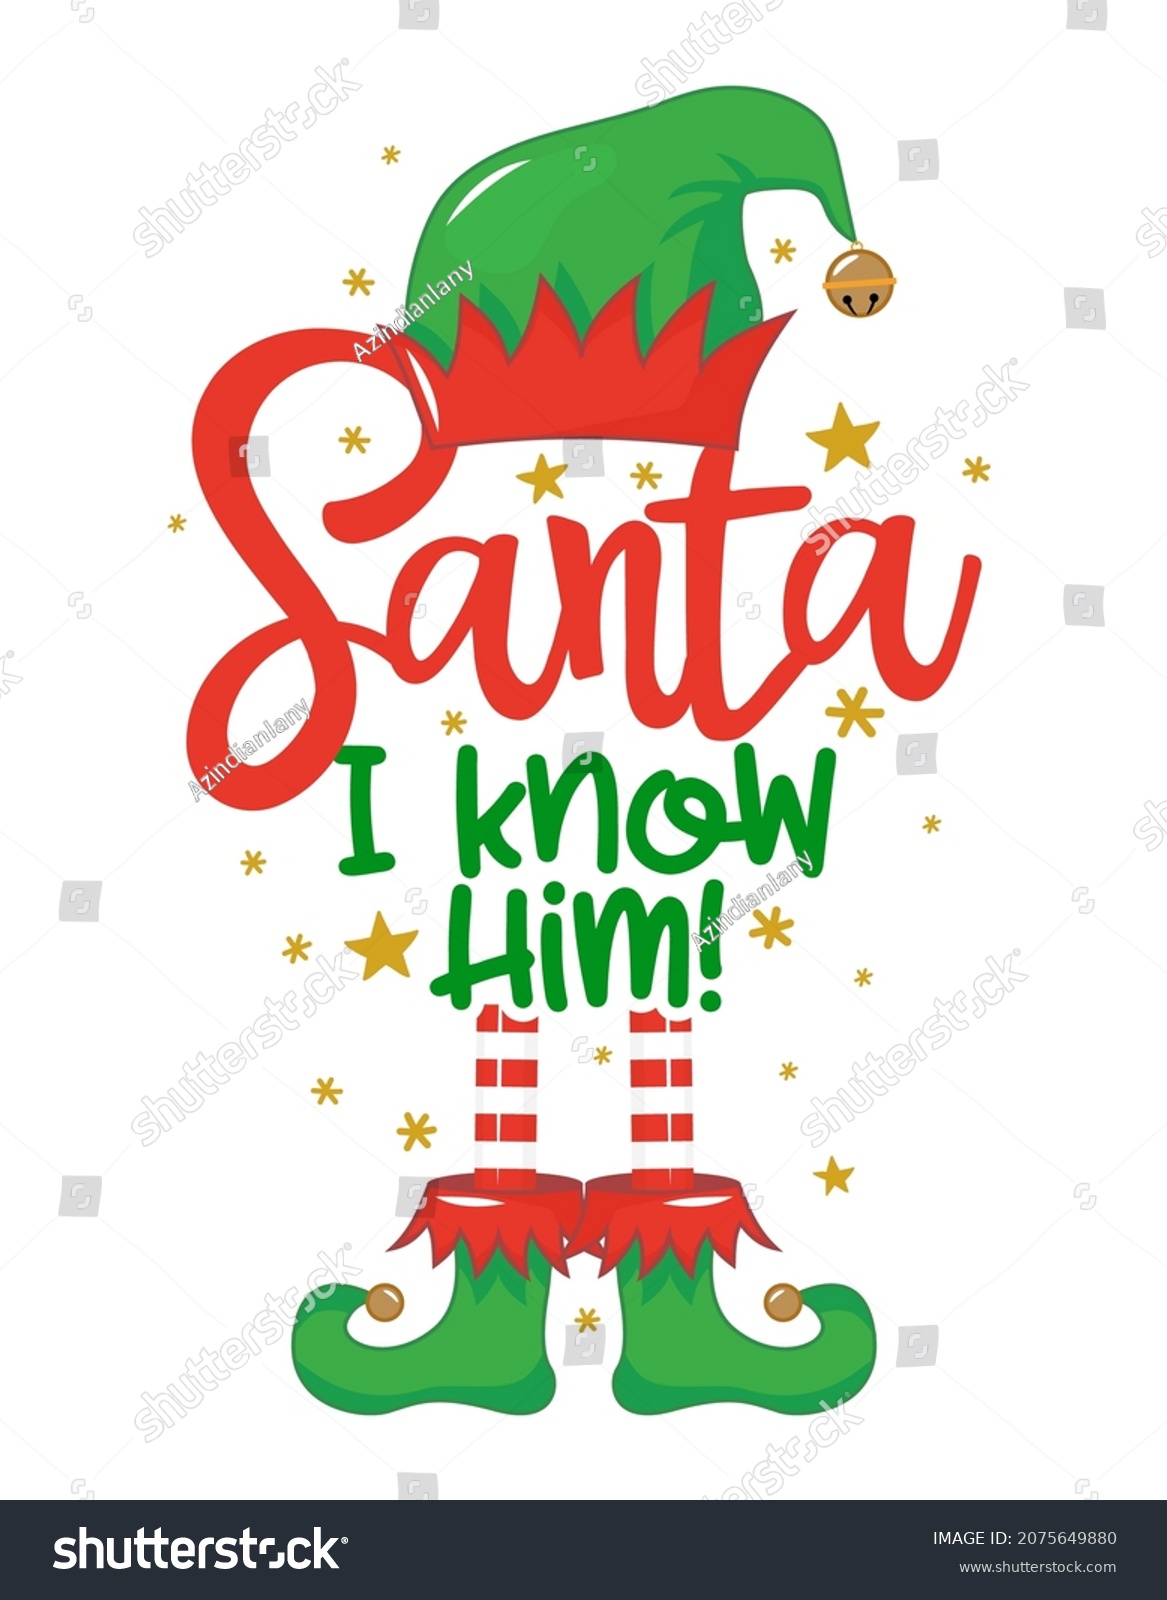 SVG of Santa! I know him! - Funny phrase for Christmas. Hand drawn lettering for Xmas greeting cards, invitations. Good for t-shirt, mug, gift, printing press, holiday quotes.  svg